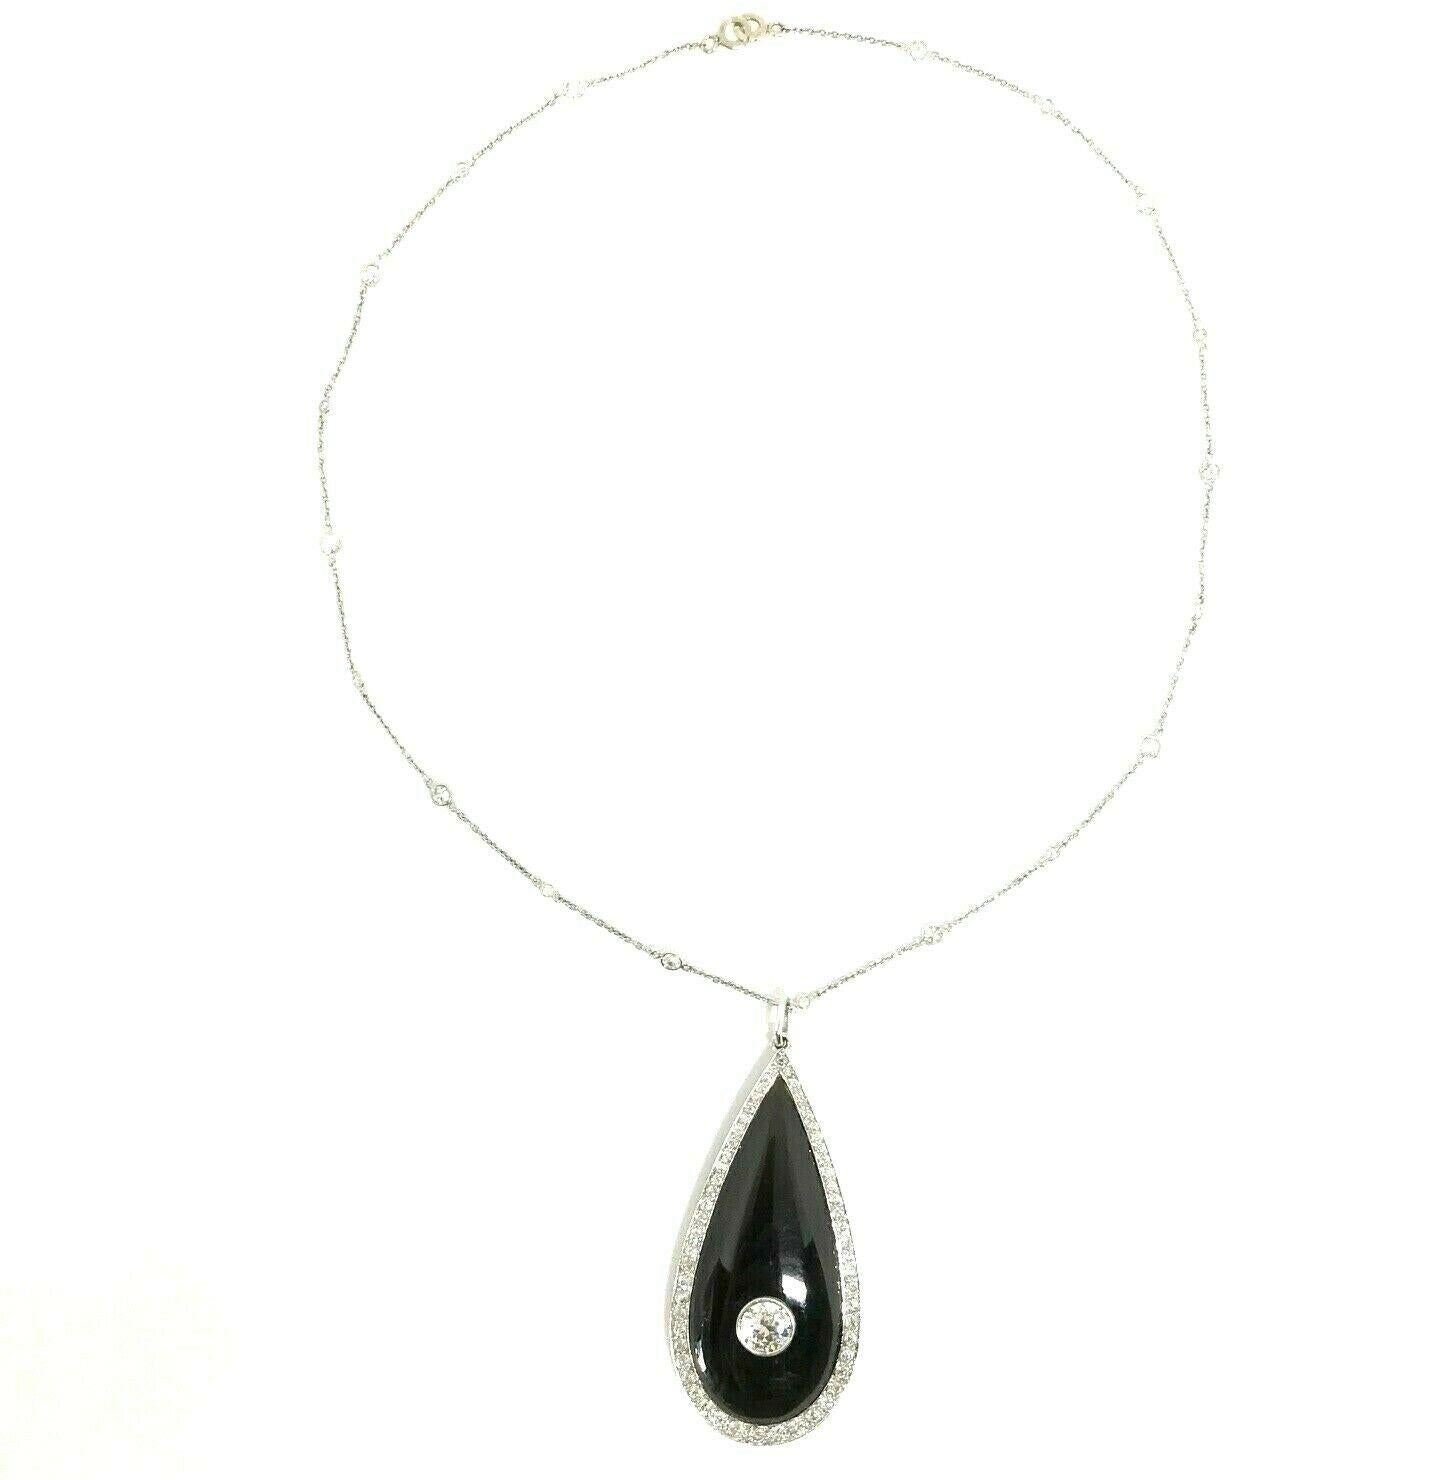 Beautiful Art Deco platinum diamond chain necklace with an onyx locket pendant. 
The center diamond is Old European cut about 1.30 carats, I color VS2 clarity. Surrounded by approximately 2 carats of the single cut I color VS2 clarity diamonds. The